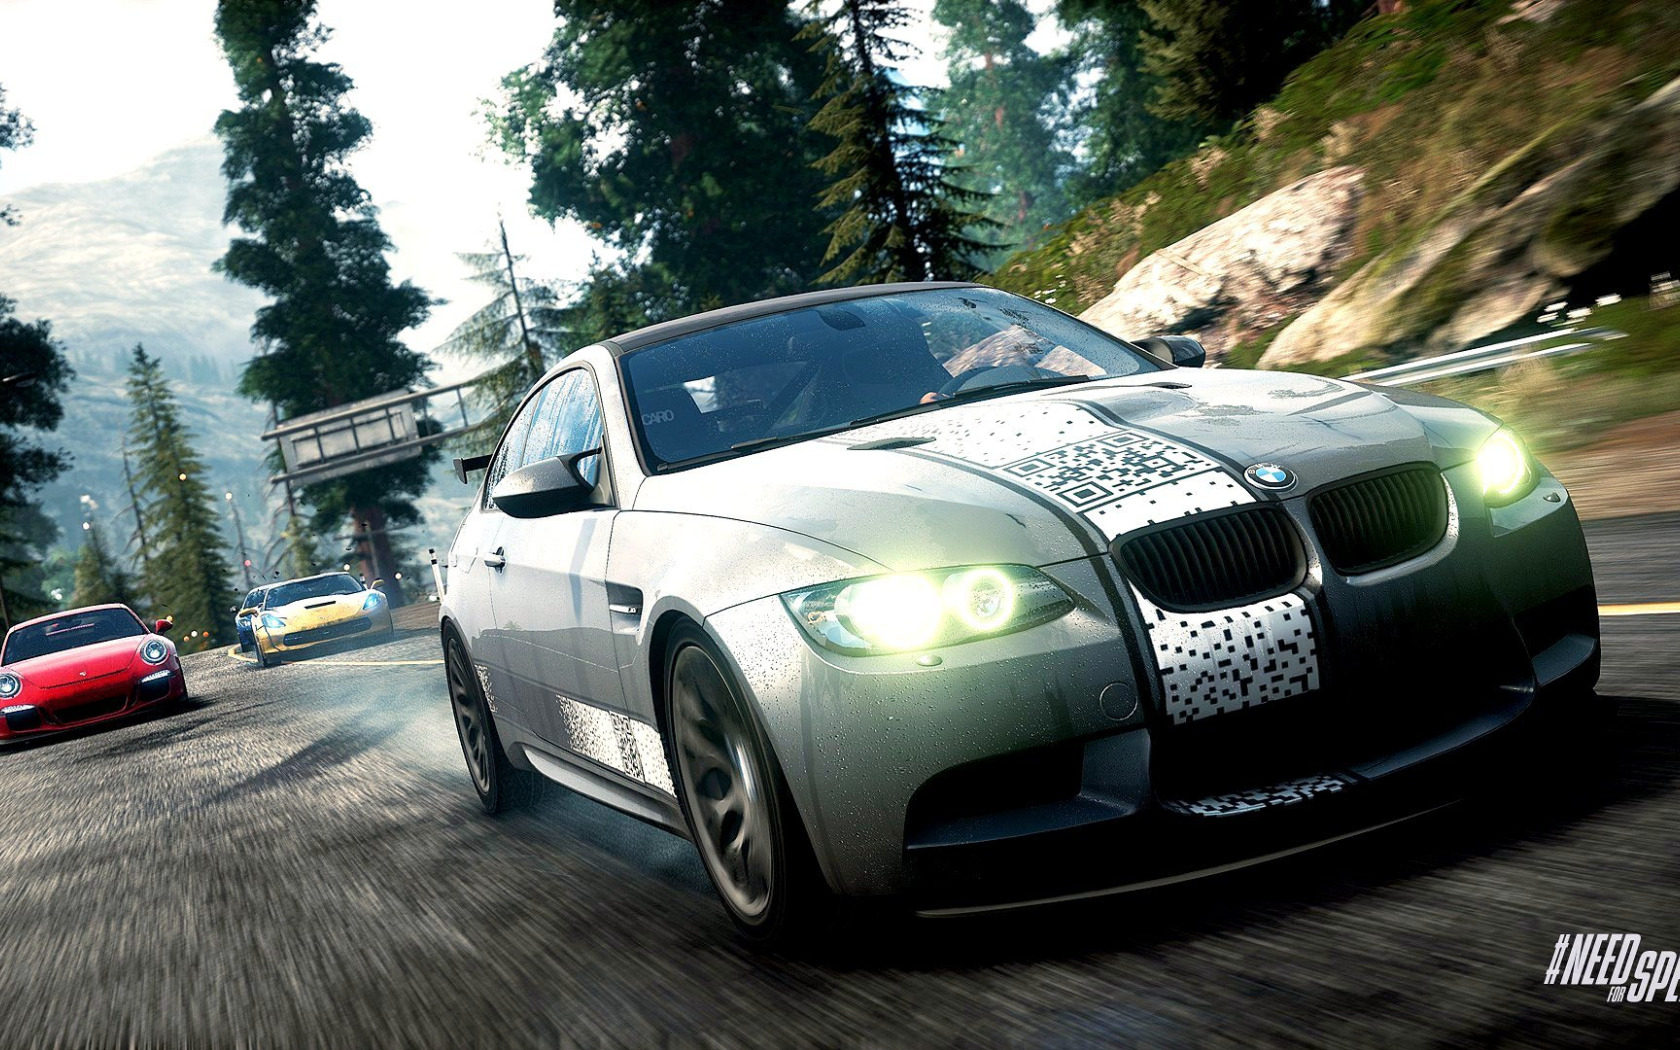 Need for Speed Rivals Xbox 360. Need for Speed Rivals BMW m3 GTR. Игра NFS Rivals. Need for Speed Rivals 2013. Игры машины нфс